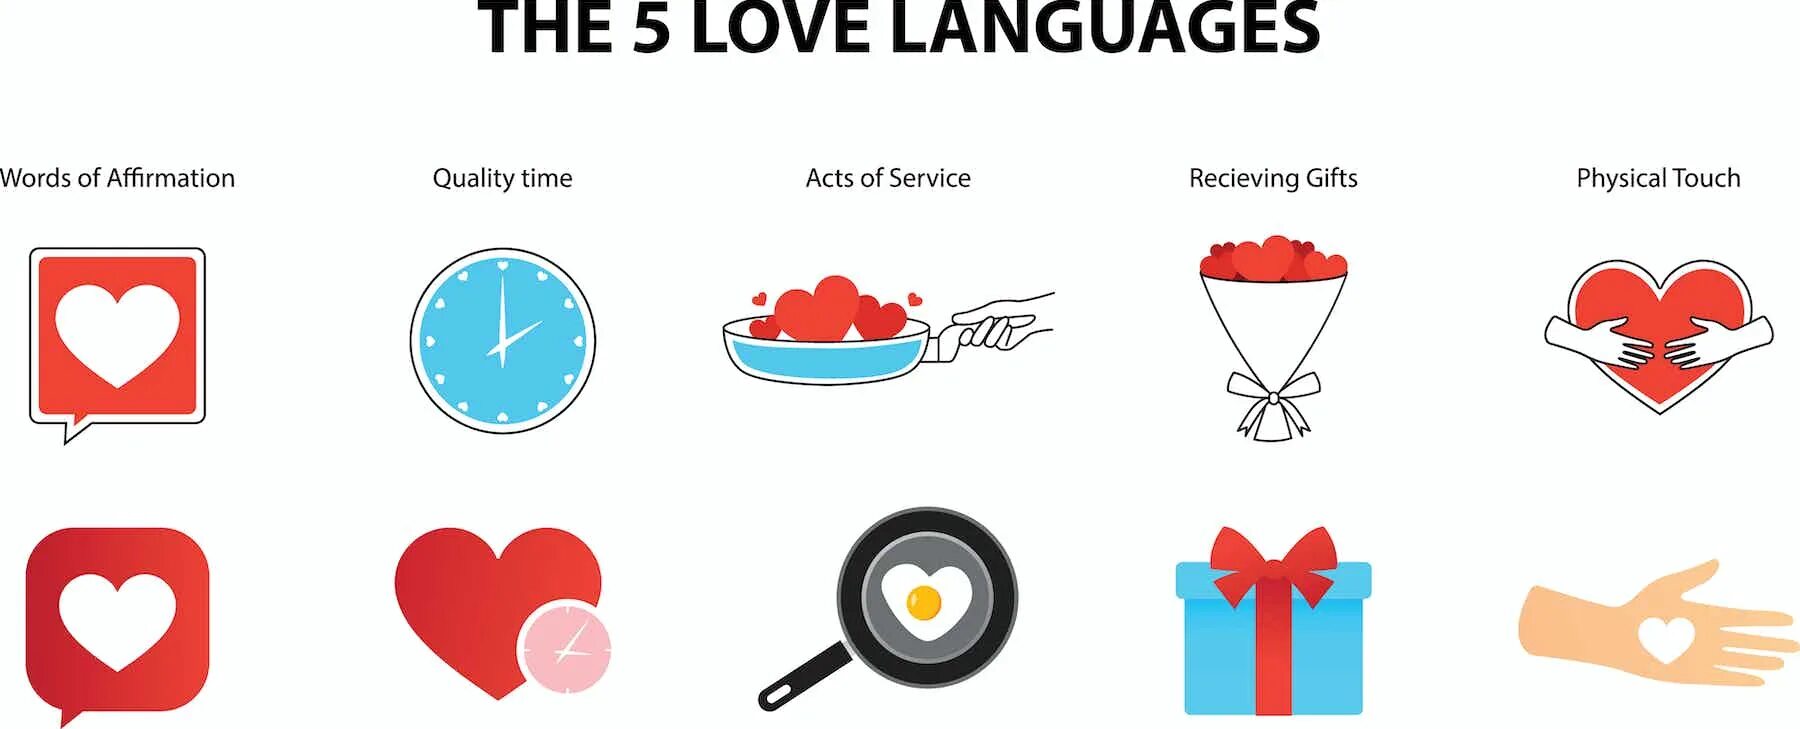 Five languages of Love. Love language. Types of Love language. 5 Languages of Love Test. Лов пять